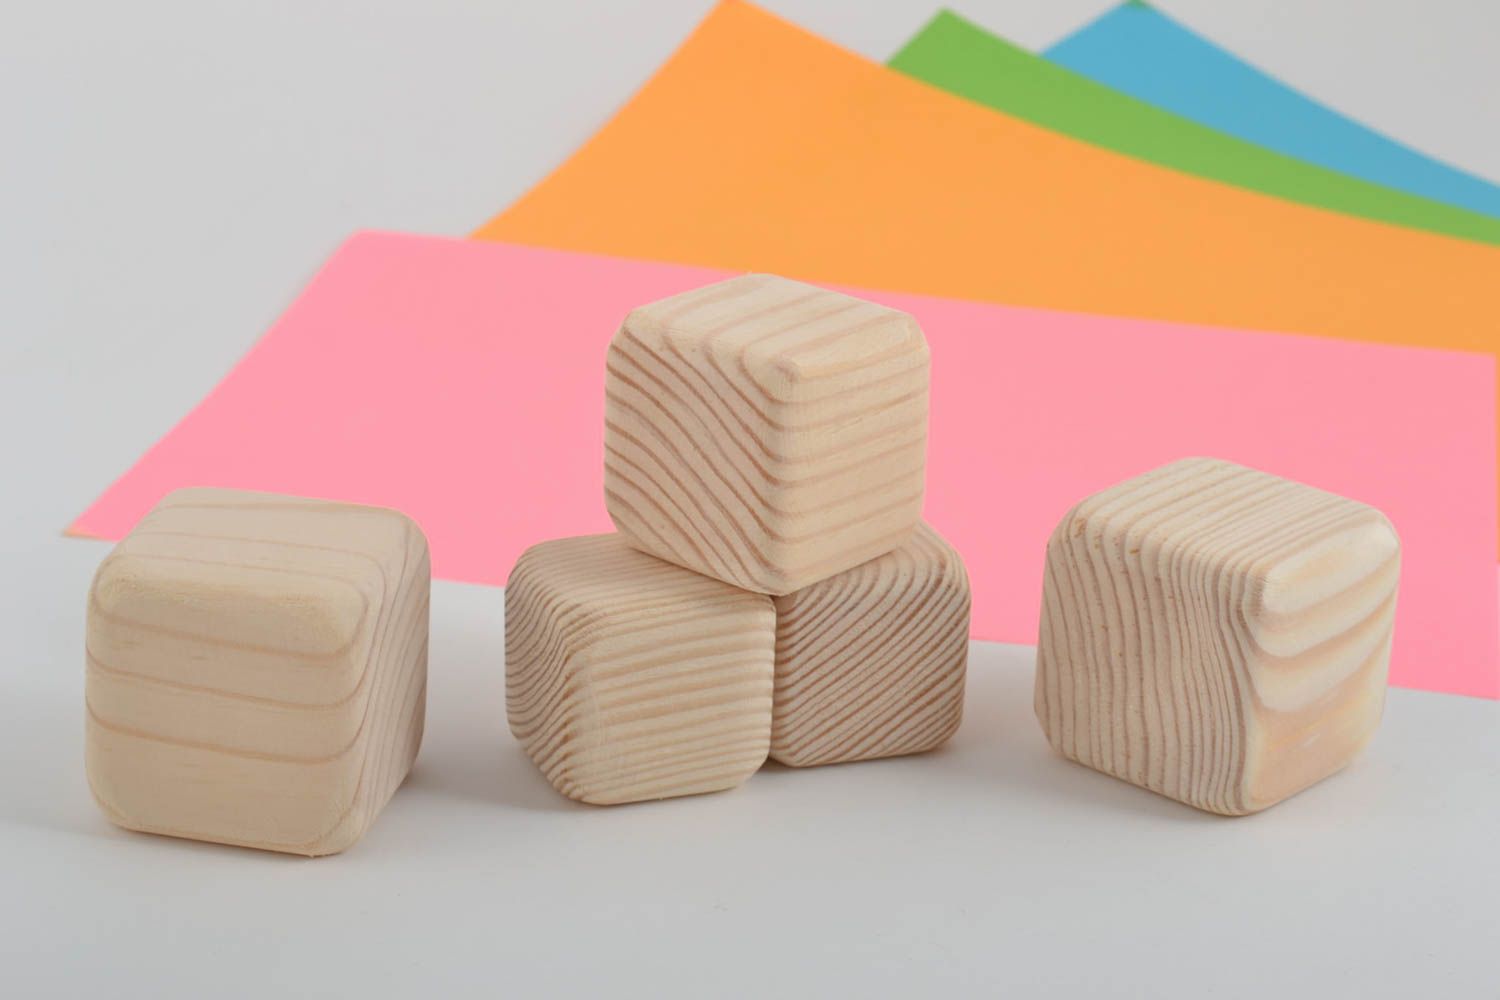 Set of 5 handmade wooden blank cubes wooden blocks toys for kids wooden craft photo 1